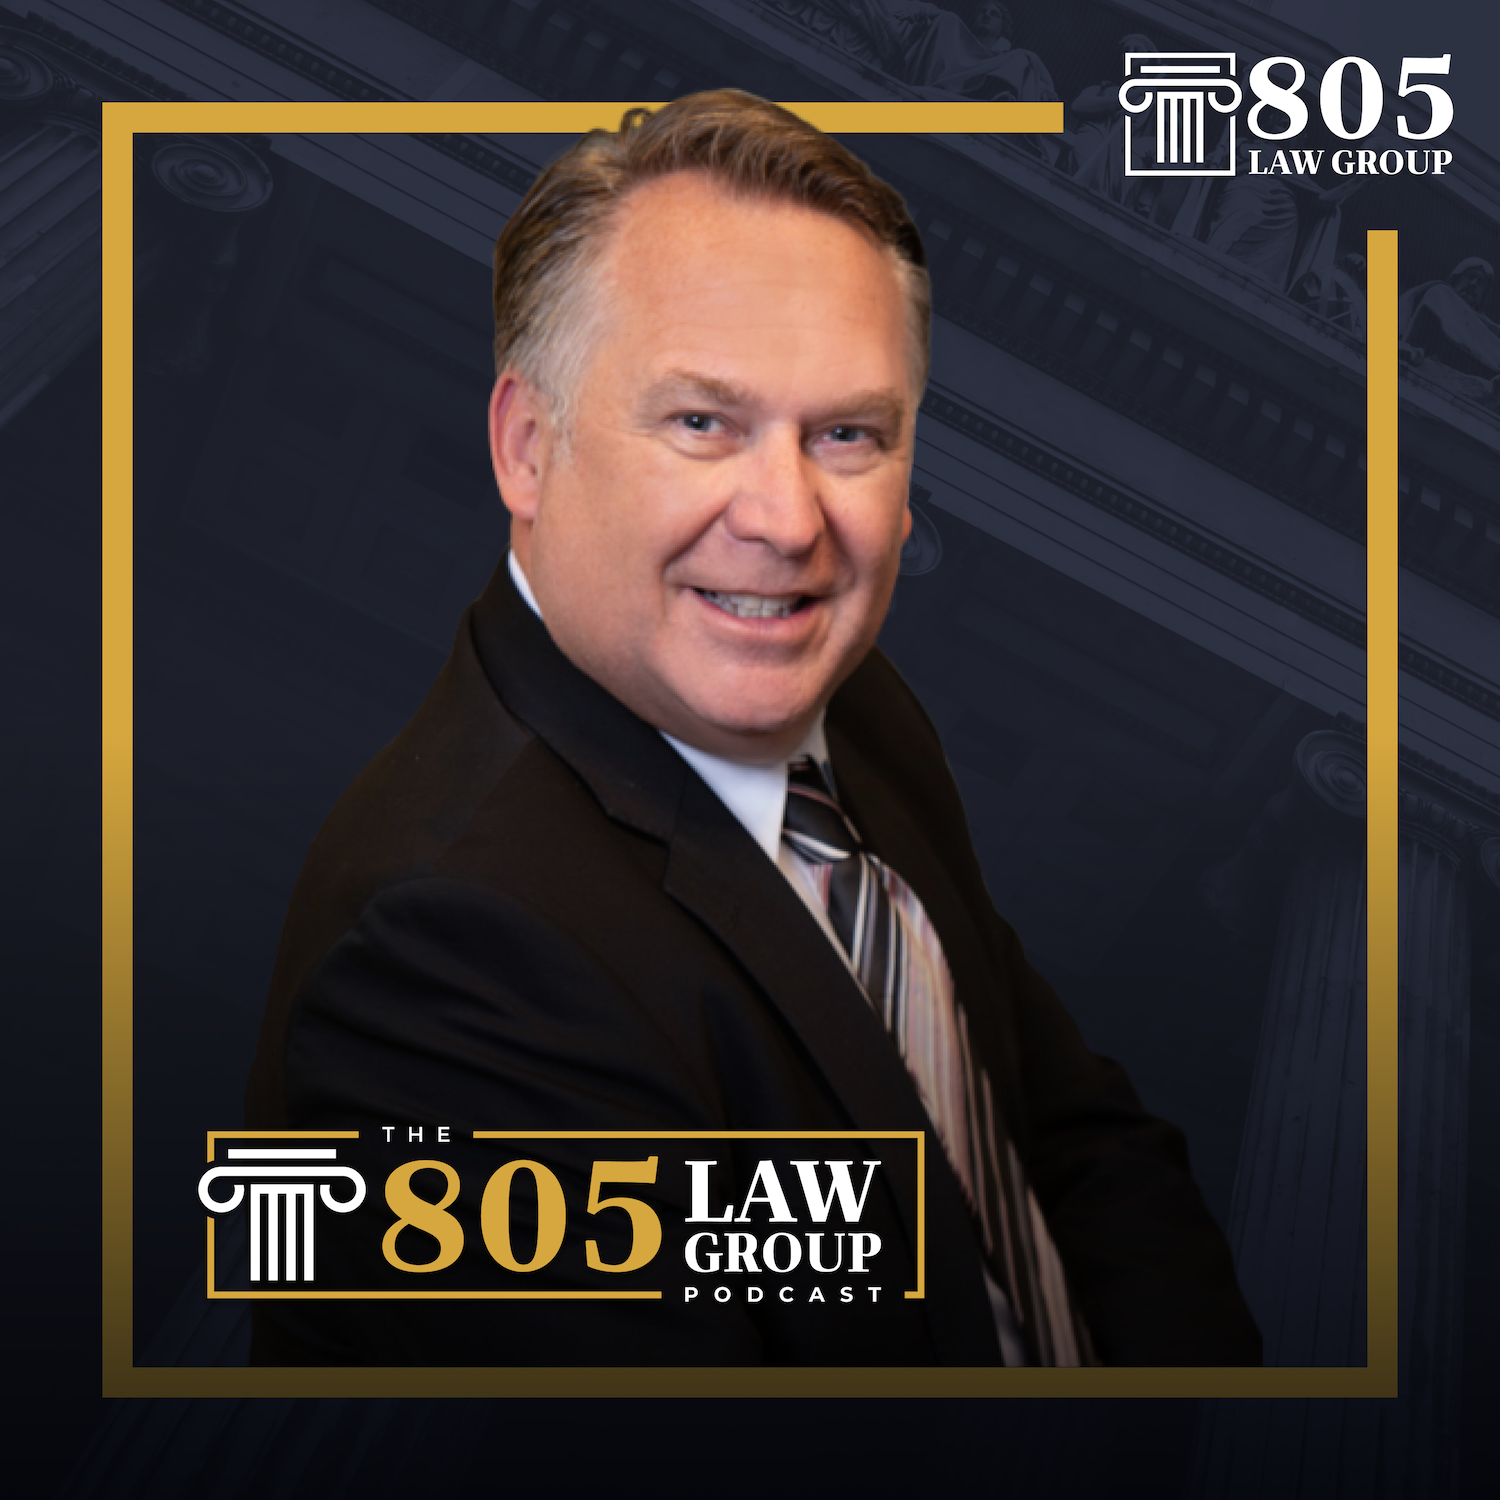 Artwork for The 805 Law Group Podcast